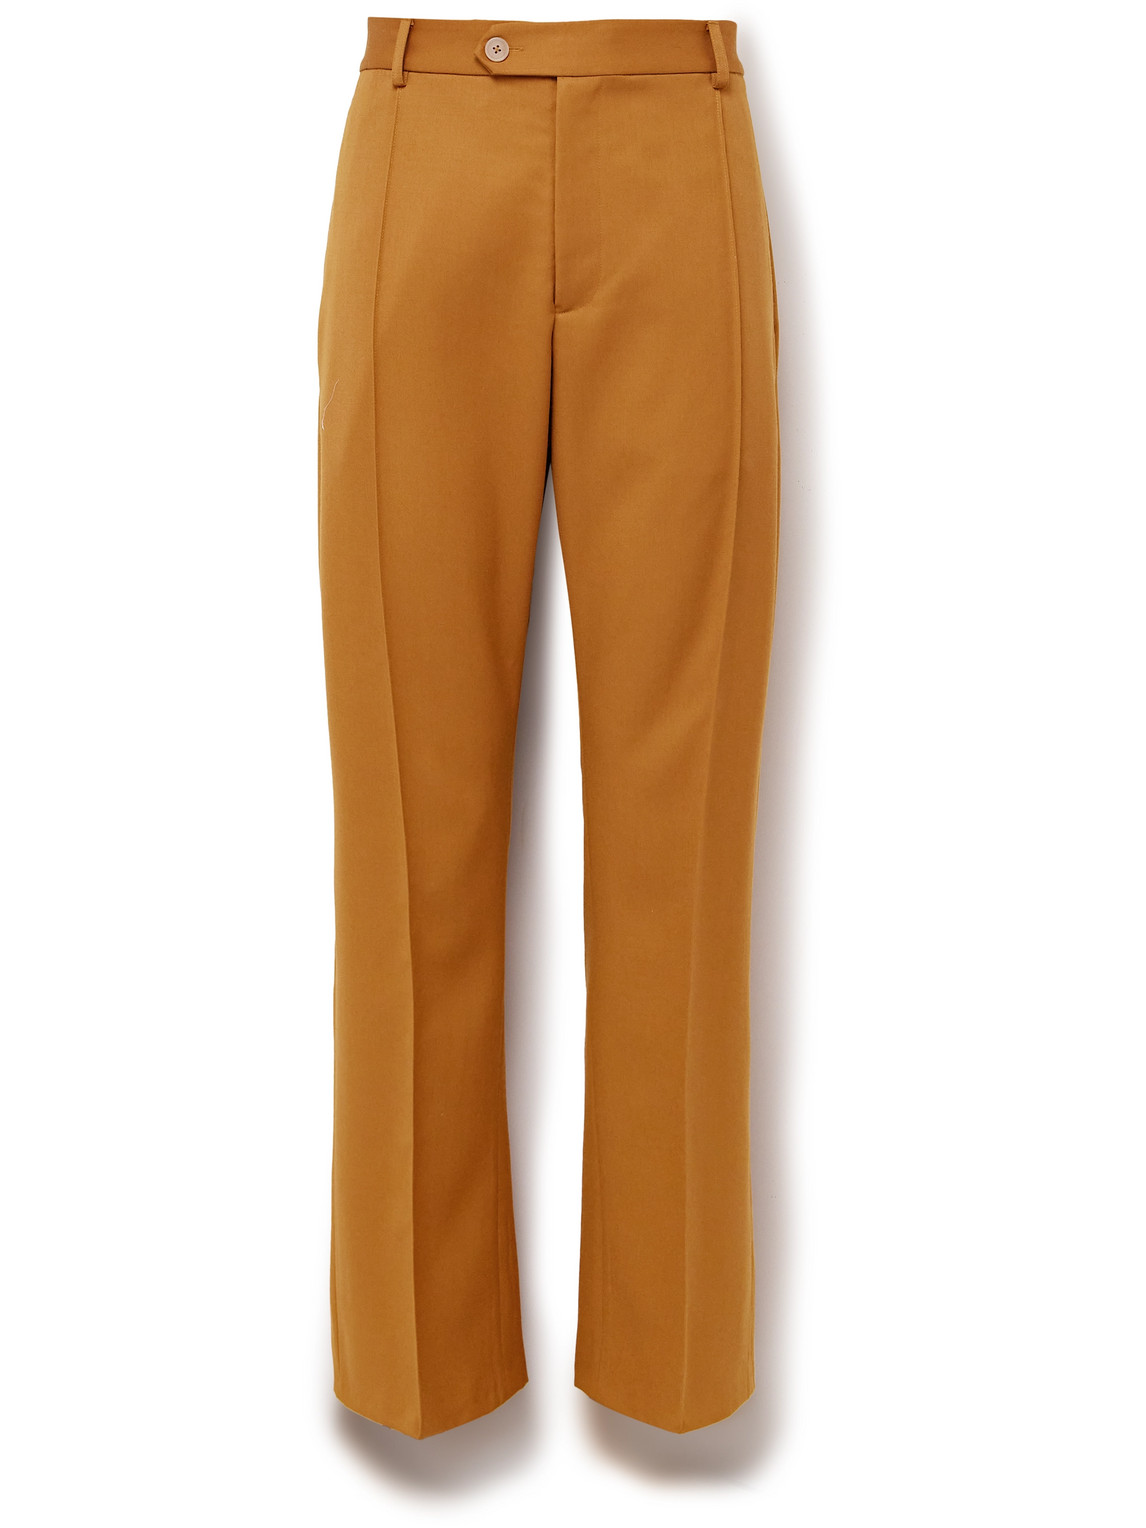 Small Talk Throwing Fits Straight-leg Pintucked Wool-gabardine Suit Trousers In Brown